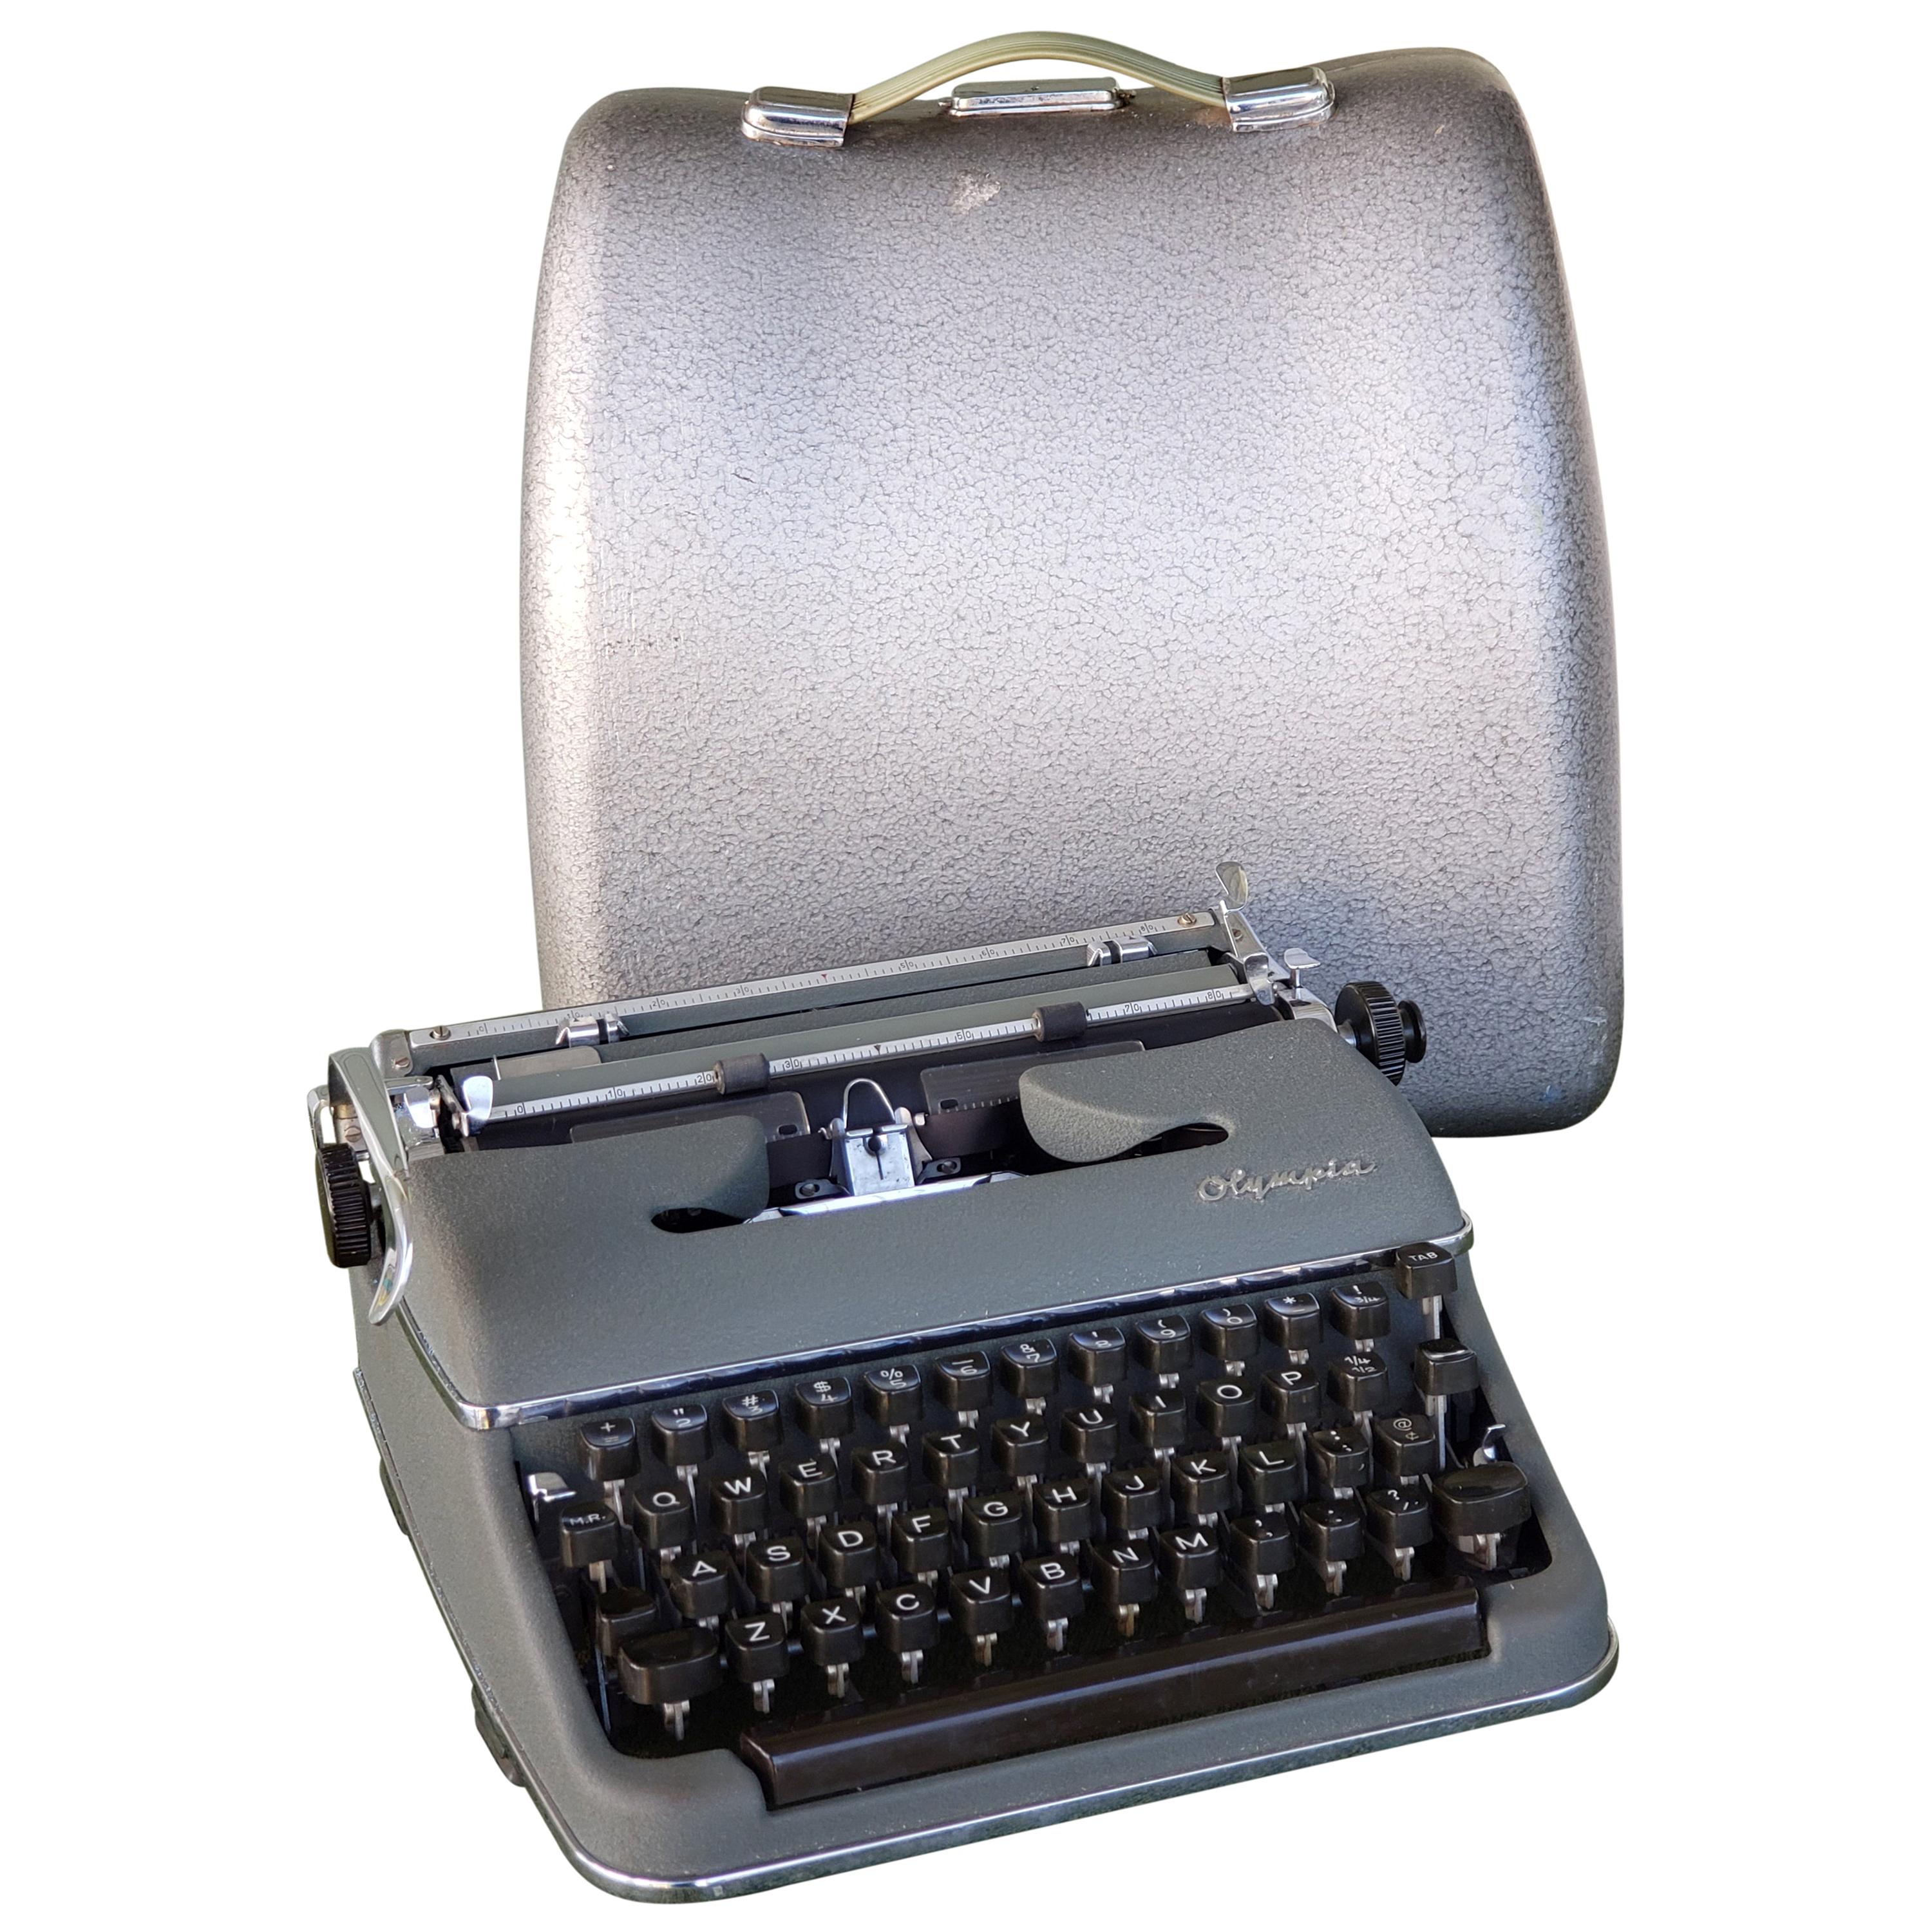 1950s Olympia SM3 De Luxe Typewriter with Hard Case